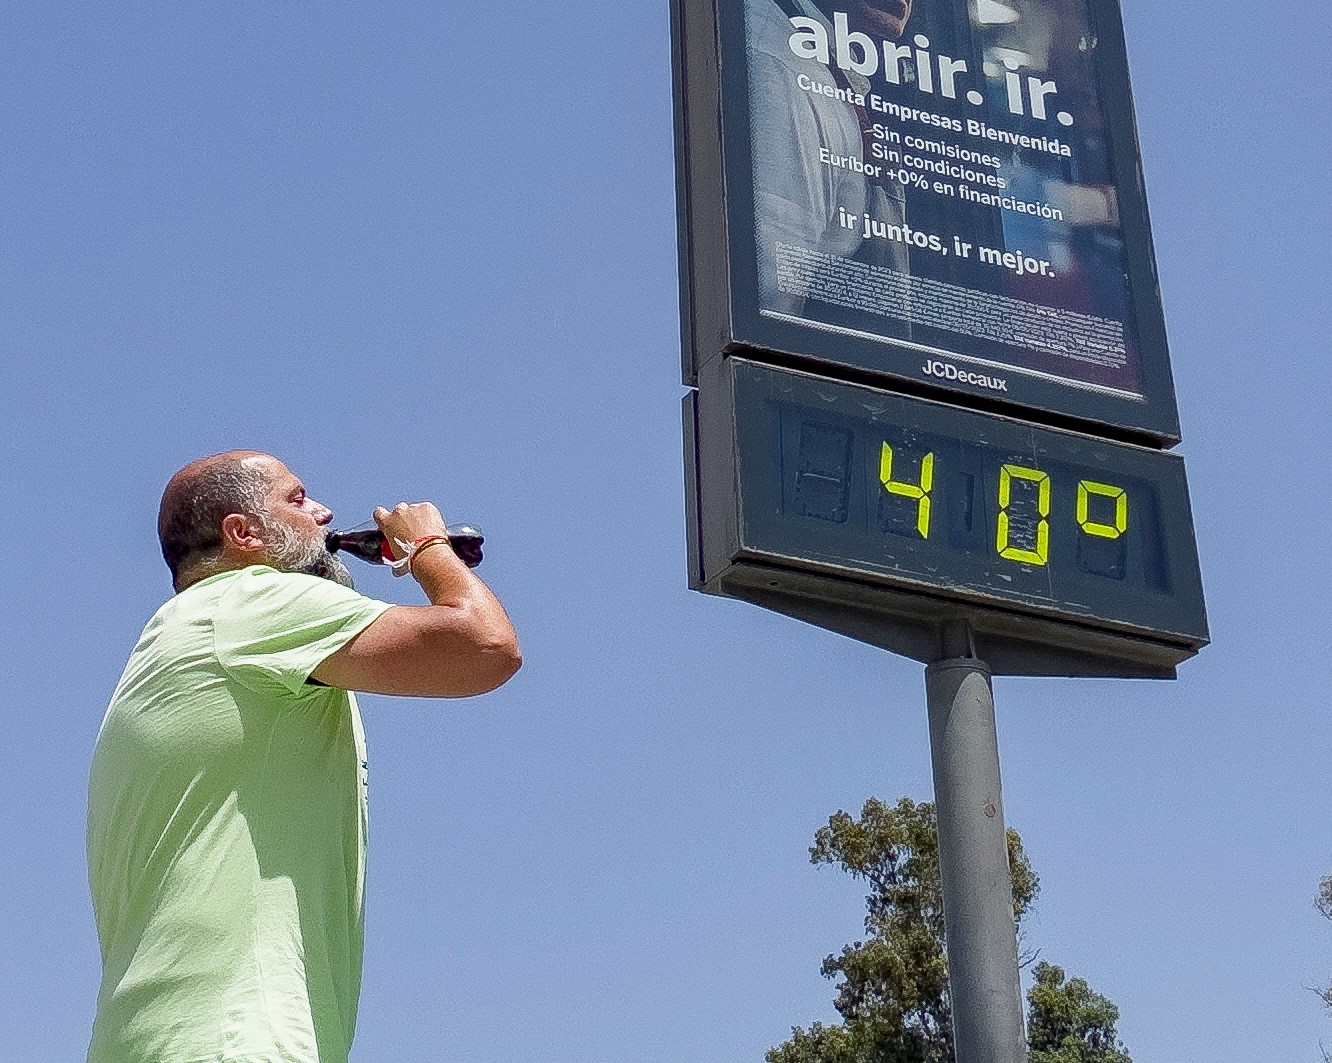 epa10710663 A man drinks next to a street thermometer displaying the temperature in Seville, Spain, 25 June 2023. The current anticyclonic situation in Spain has led to the first heat wave of the summer, which will last until 28 June and will be more pronounced in the southwest of the peninsula, where temperatures can even reach 45 degrees Celsius at its peak on 26 June.  EPA/DAVID ARJONA